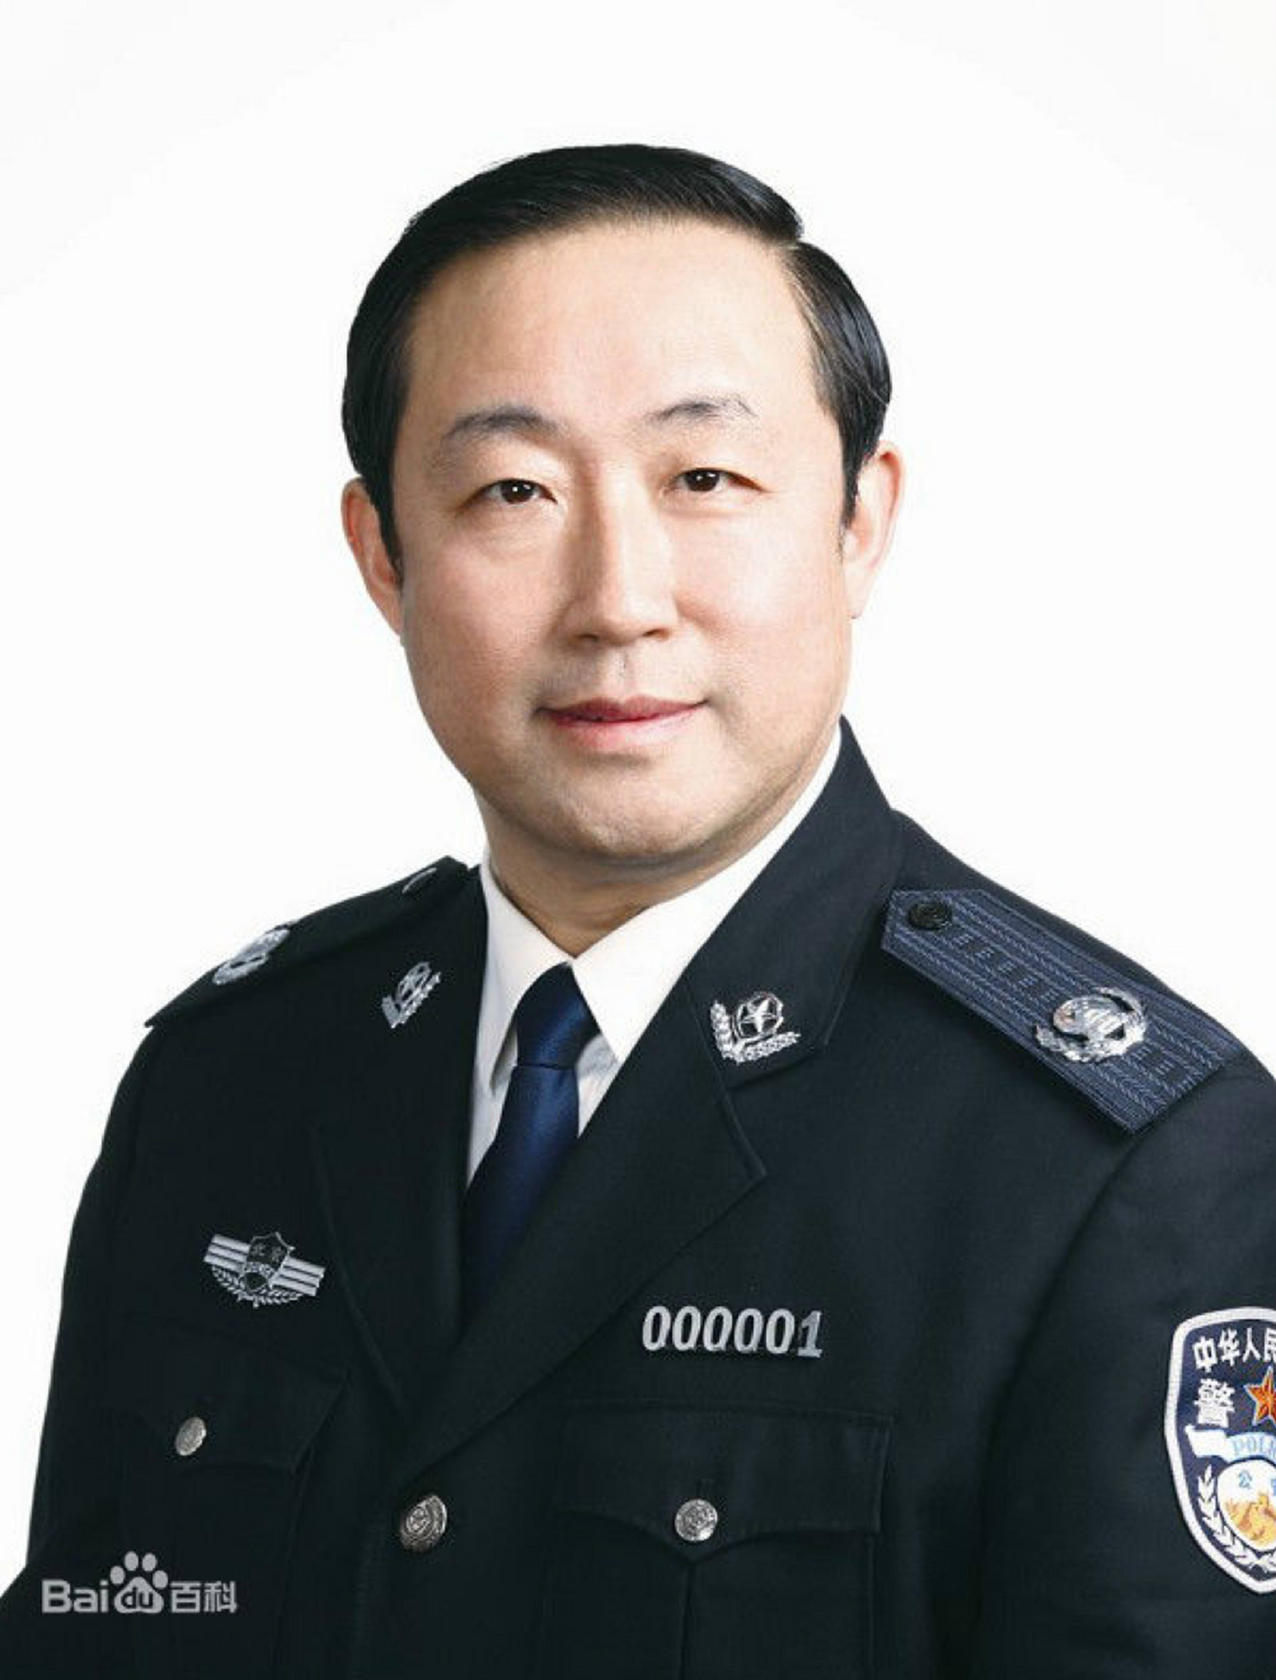 Fu Zhenghua has been promoted from fifth to third-in-command at the Ministry of Public Security.